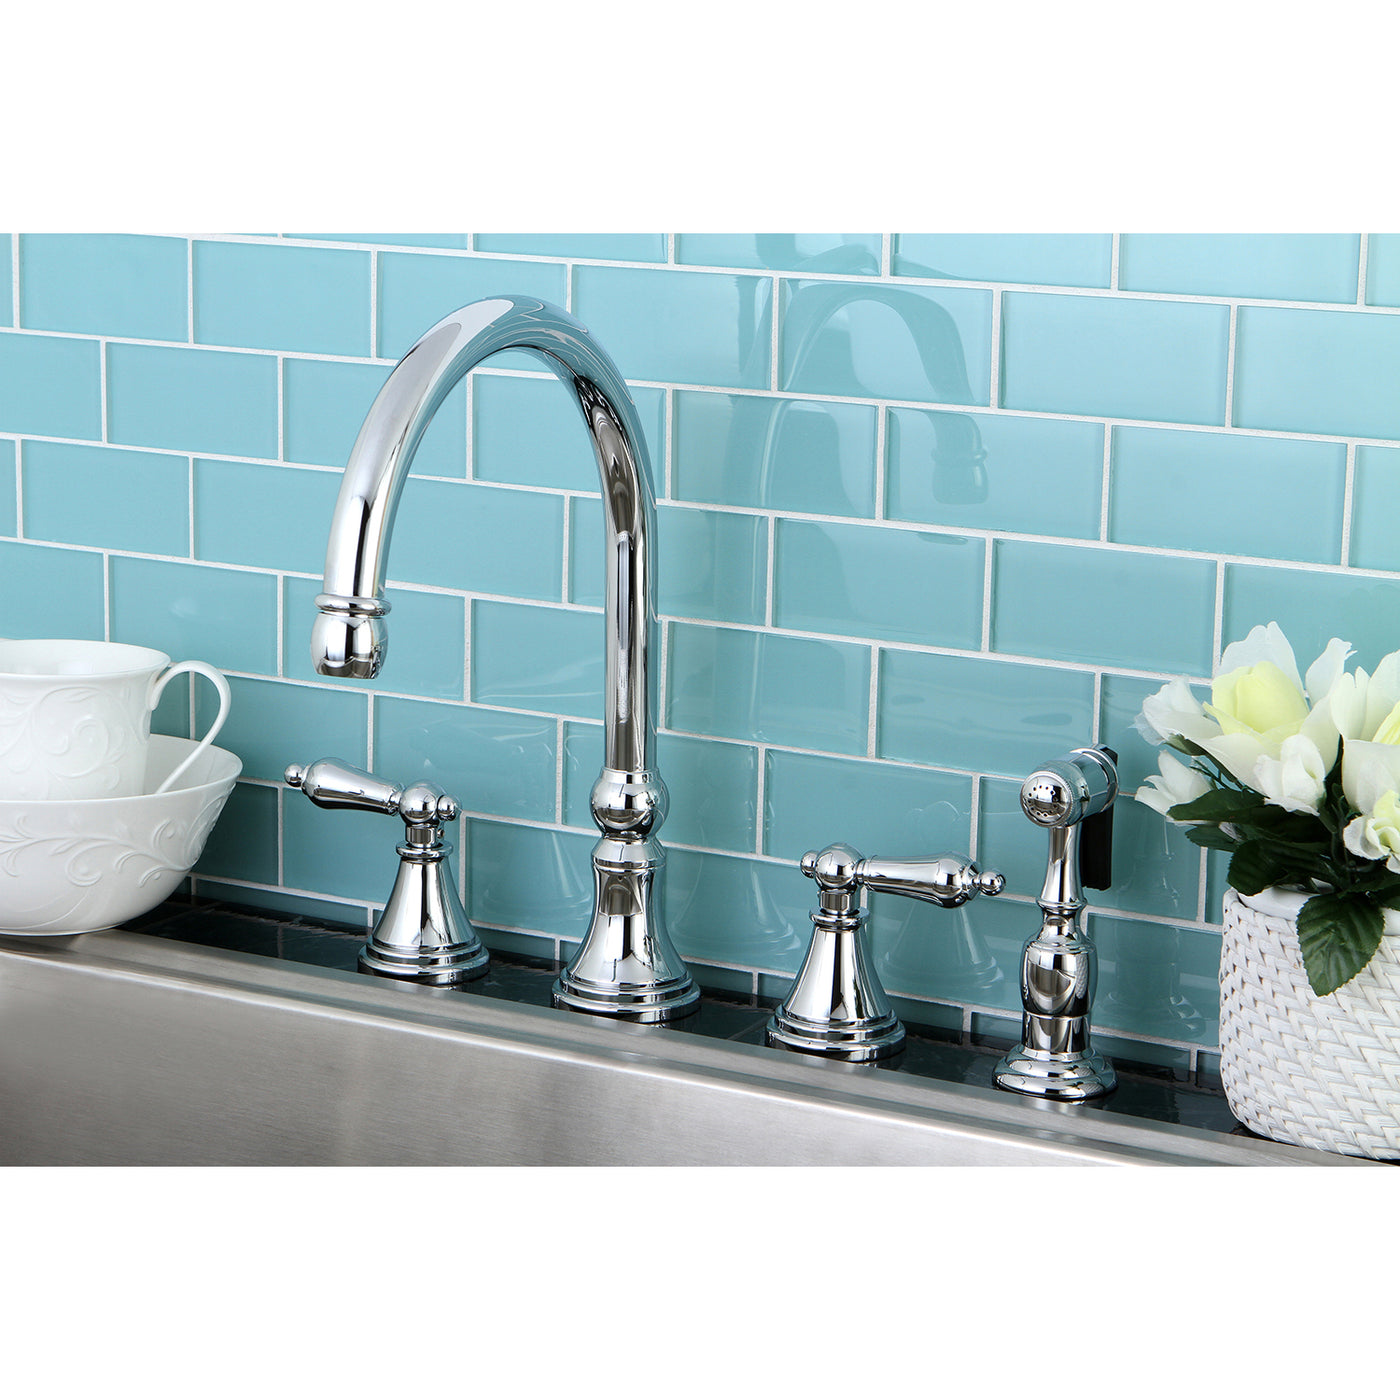 Elements of Design ES2791ALBS Widespread Kitchen Faucet with Brass Sprayer, Polished Chrome